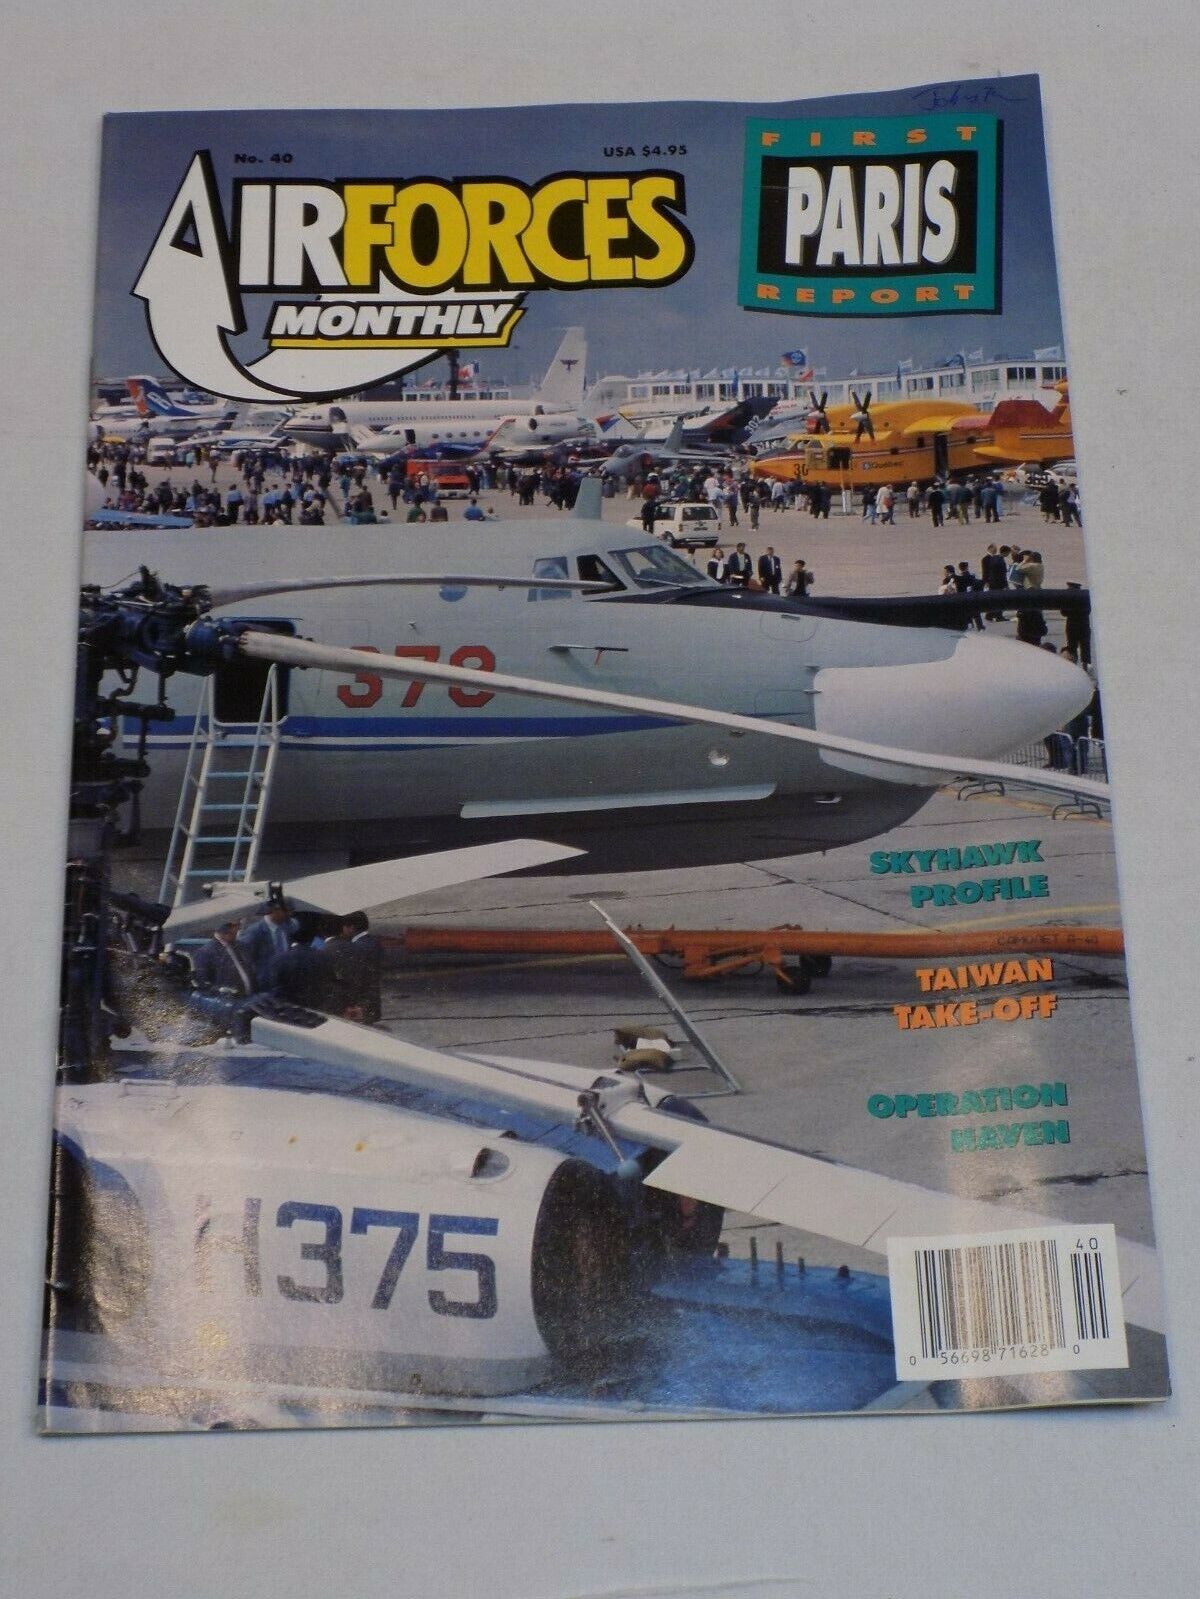 Airforces Monthly Magazine July 1991 Skyhawk Taiwan Operation Haven A-4 Mission